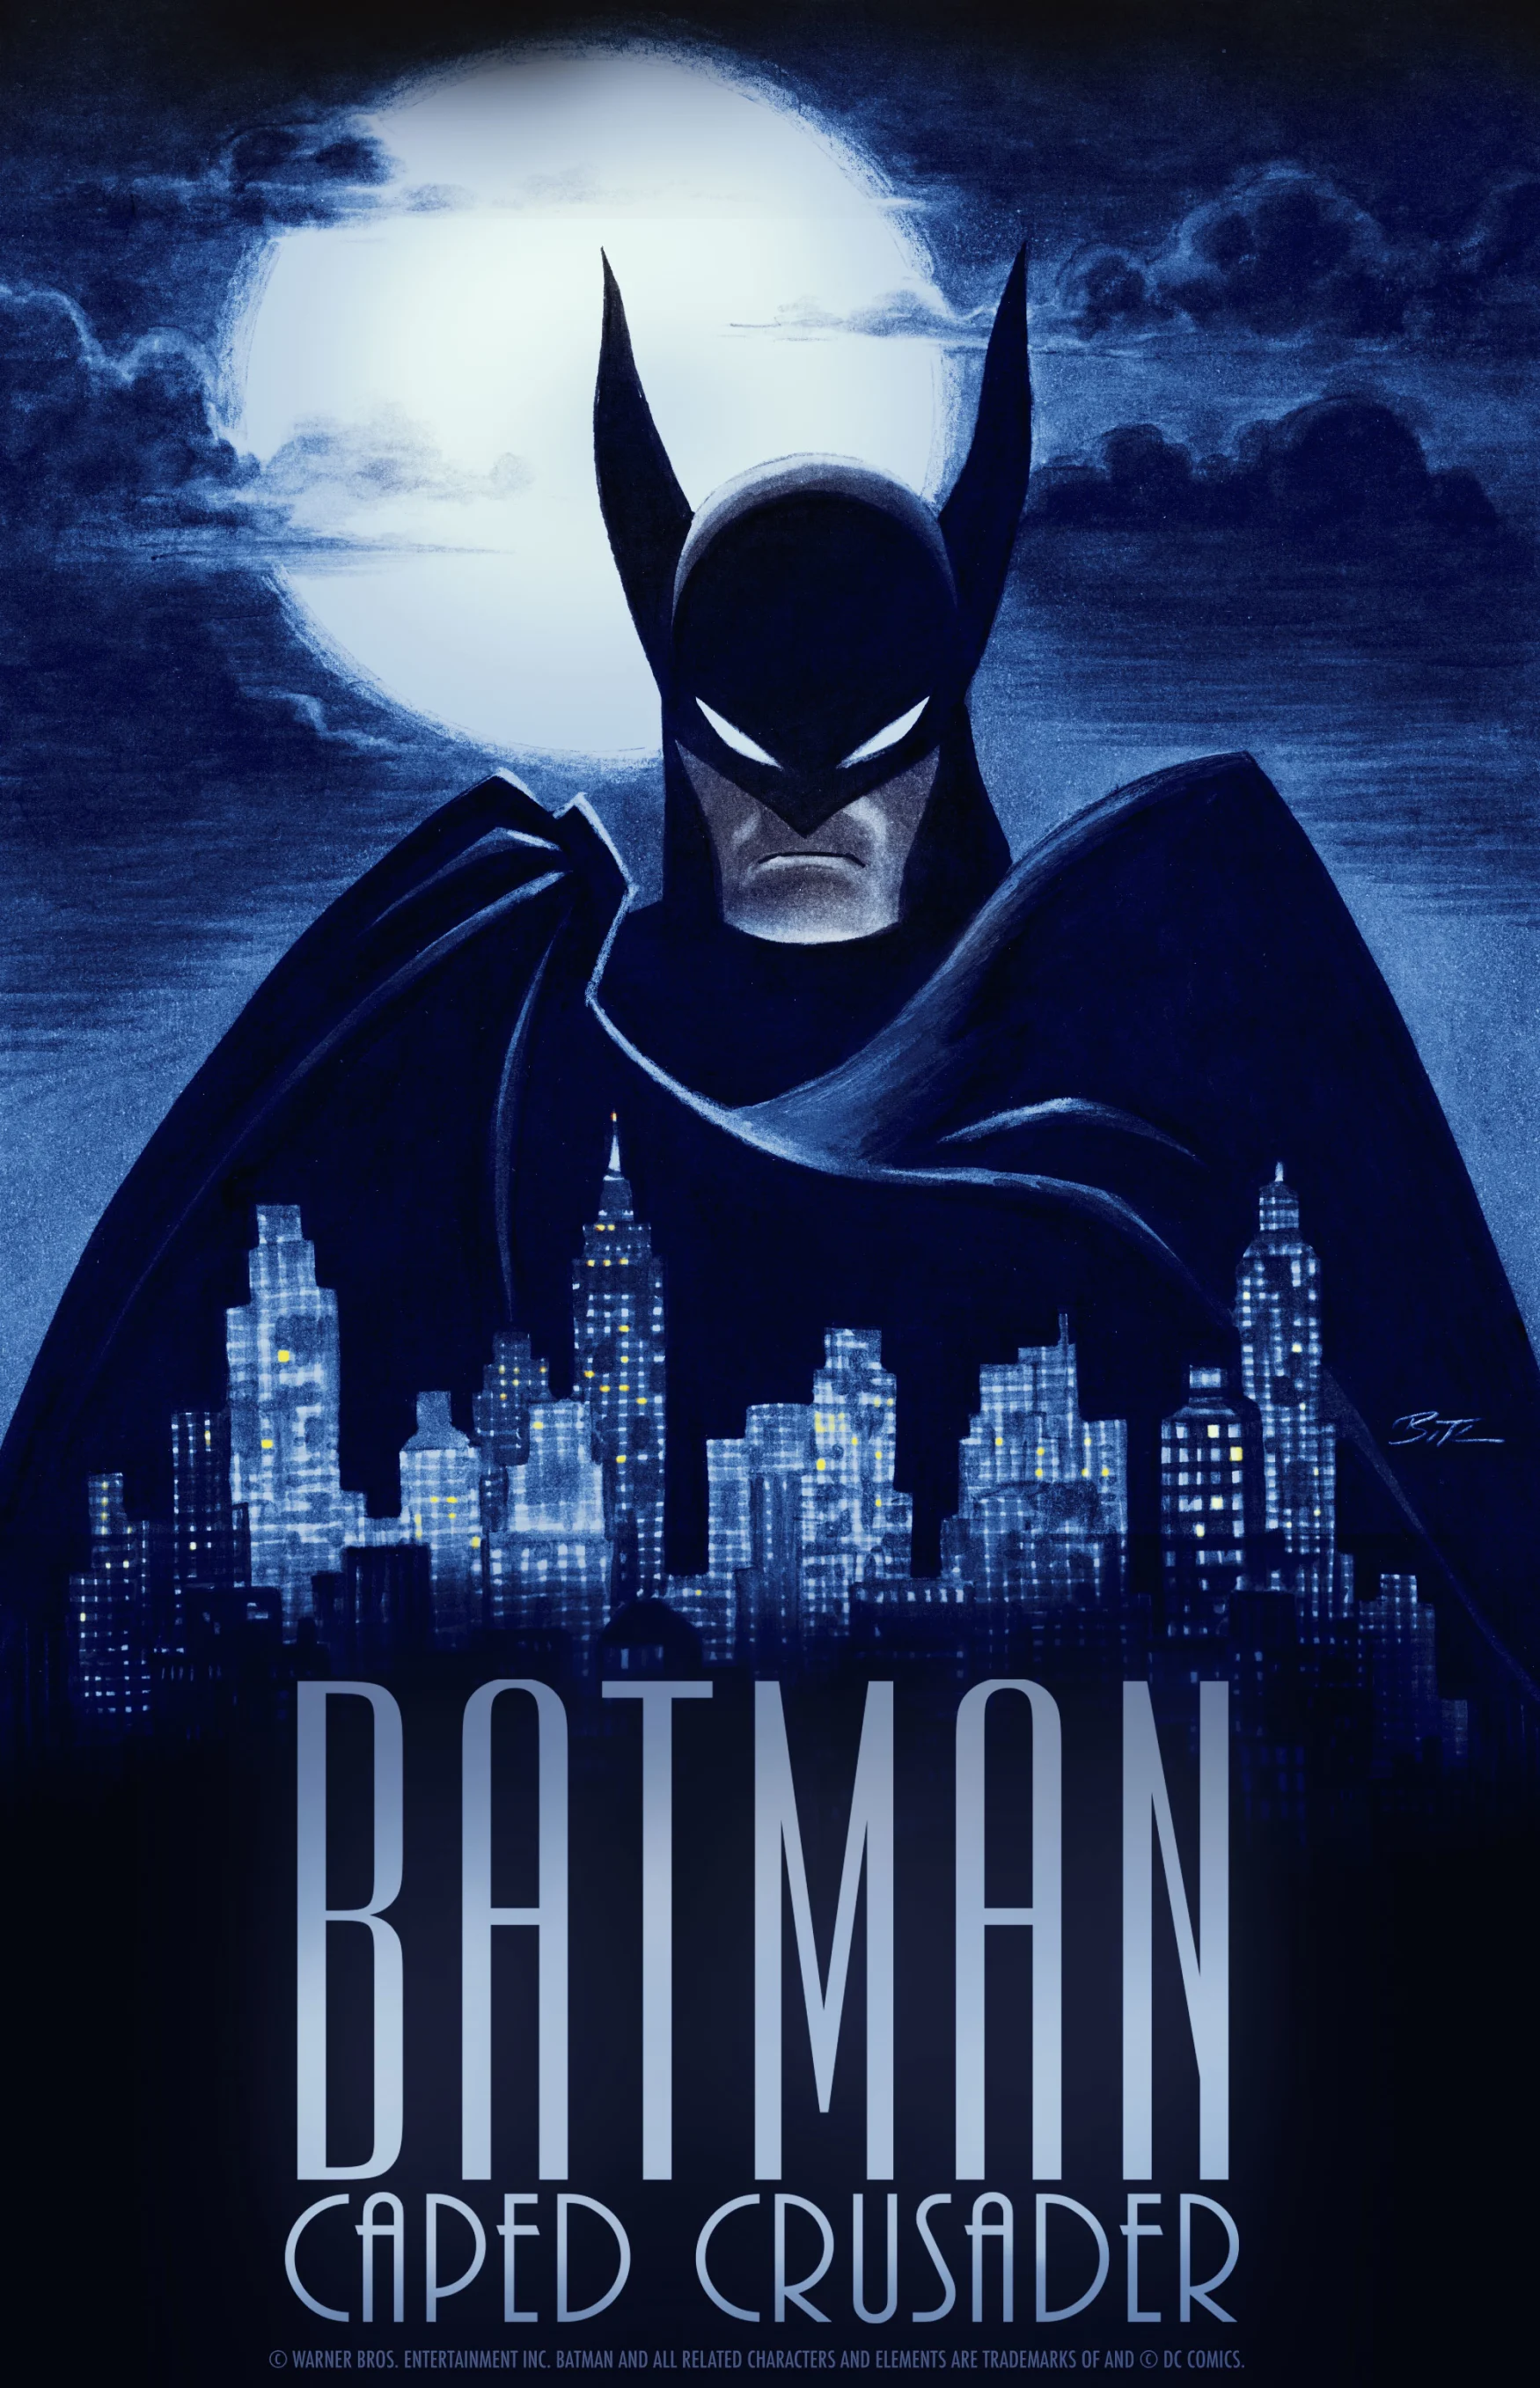 . Abrams is bringing a new Batman animated series to HBO Max | Engadget